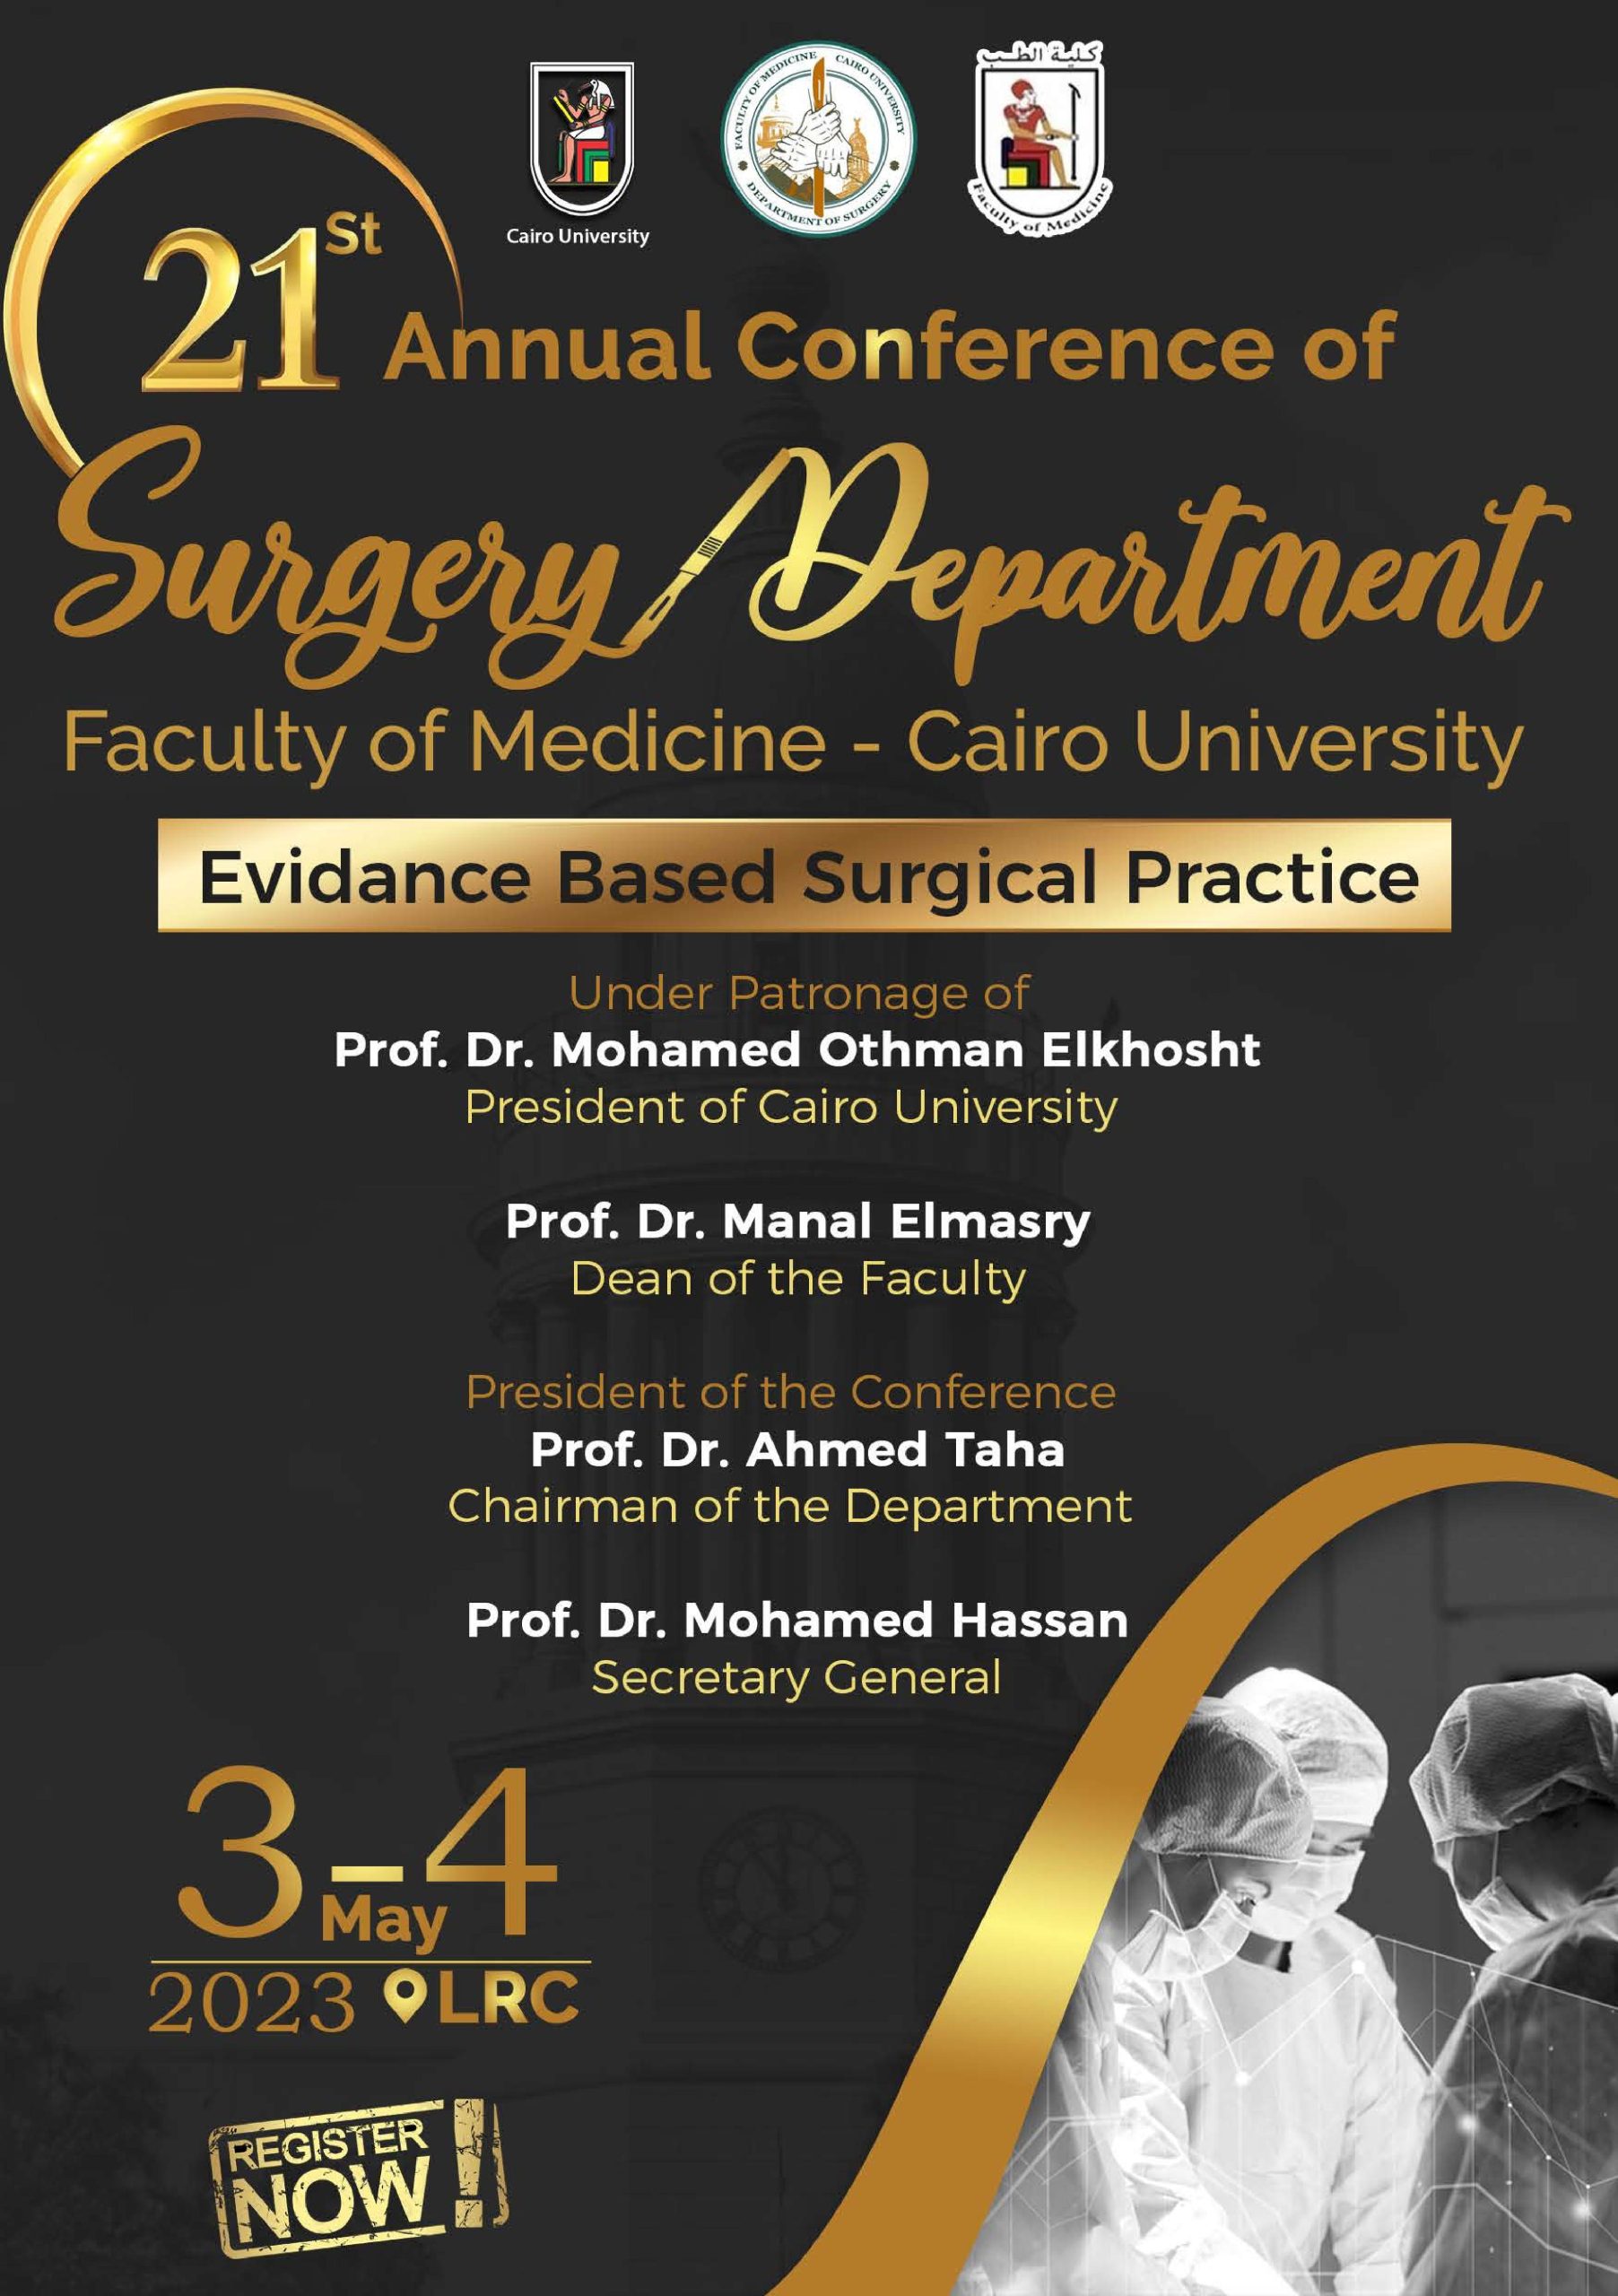 21st Annual Conference of Surgery Department Faculty of Medicine